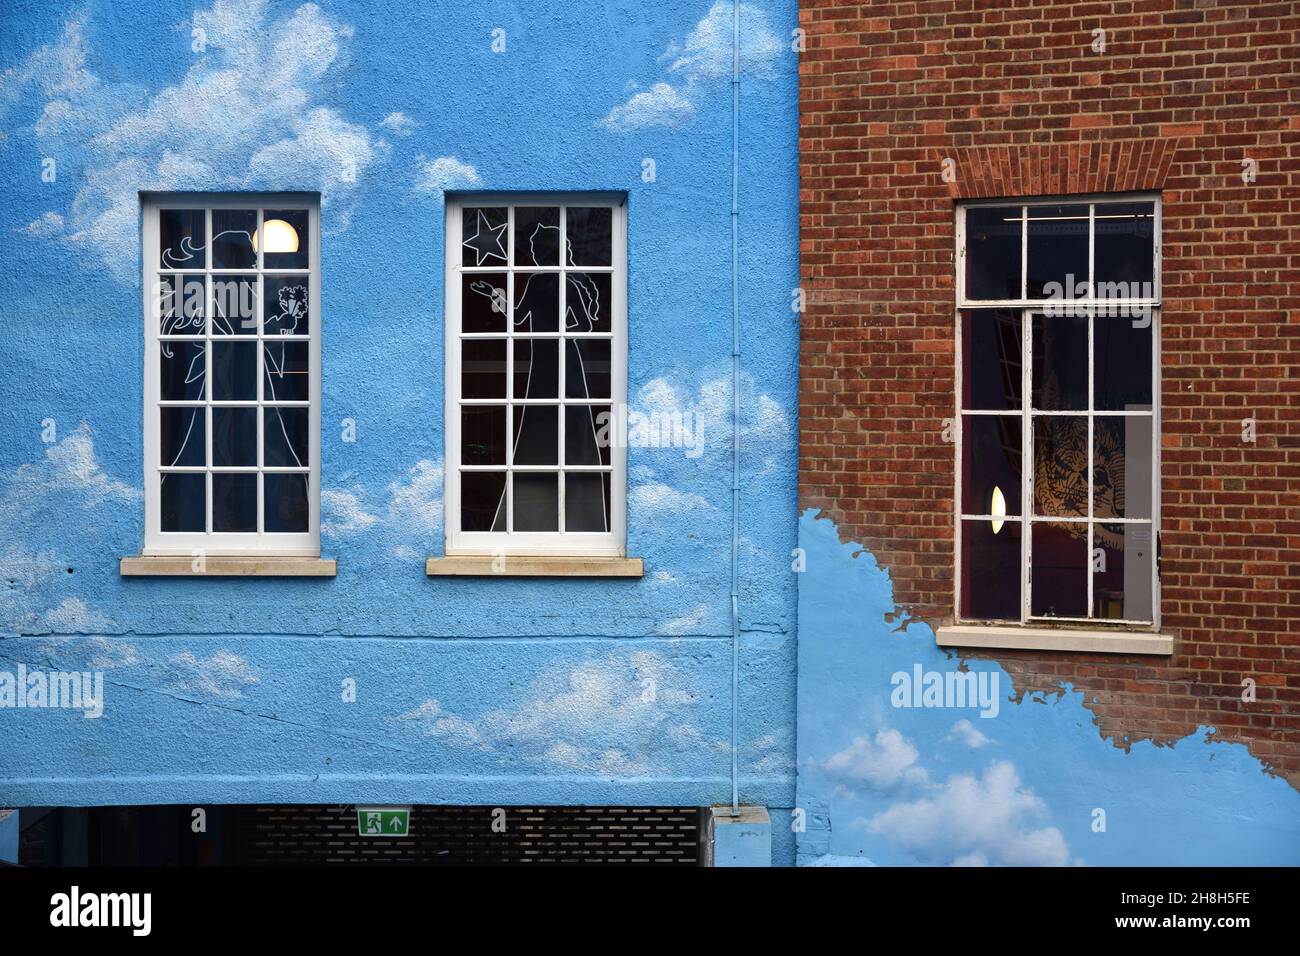 Window Pattern on Blue Wall with Cloud Design on Facade of Old Building The Story Museum in the Old Town or Historic District Oxford England Stock Photo